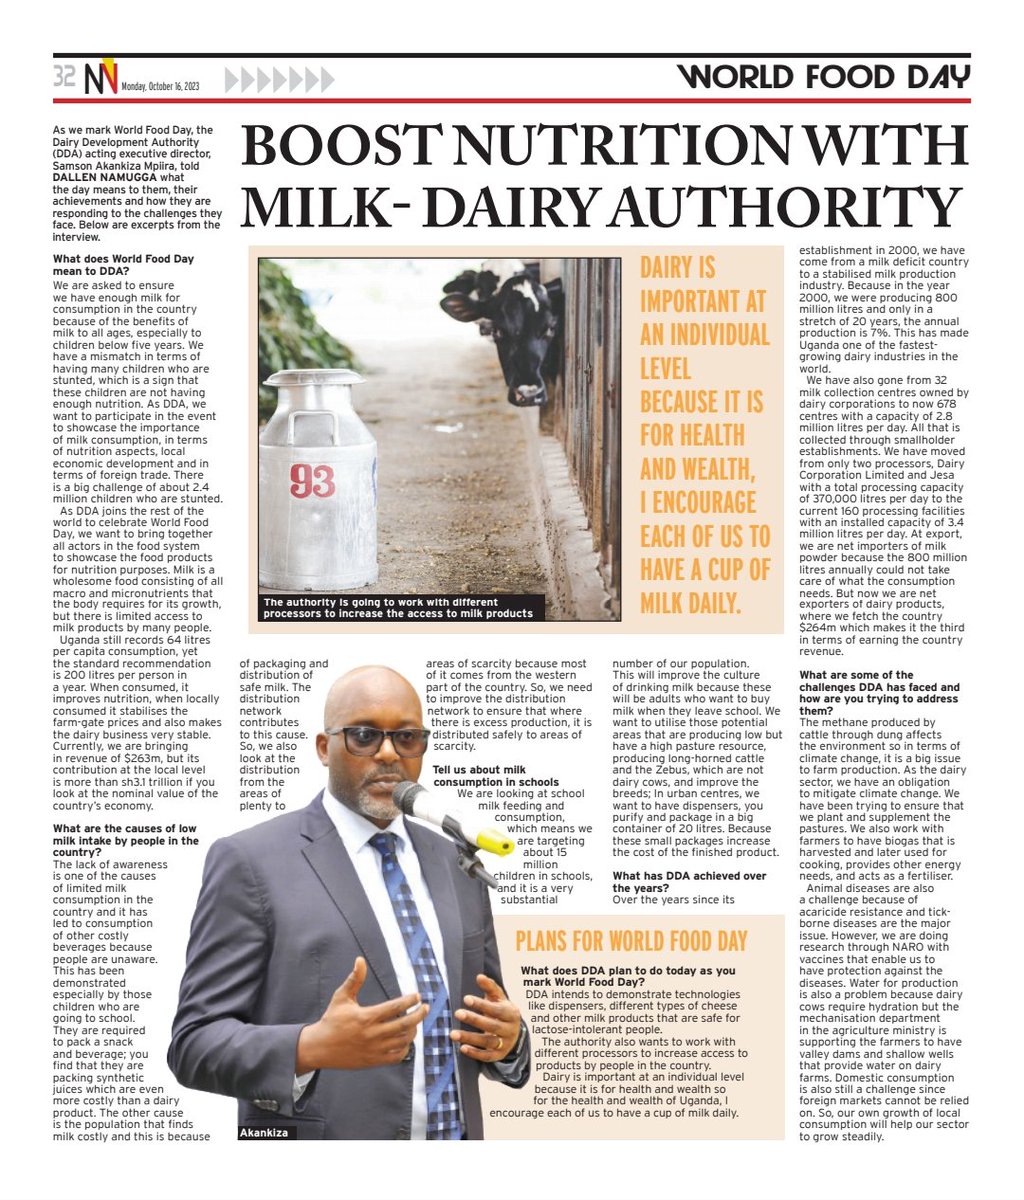 Today is World Food Day. Dairy is considered a wholesome food since it contains all the ingredients needed for a healthy body. Read our AG ED @MpiiraSamson 's interview in today's @newvisionwire . @DrRwamiramaBK @GcicAgriculture @MAAIF_Uganda @KagutaMuseveni